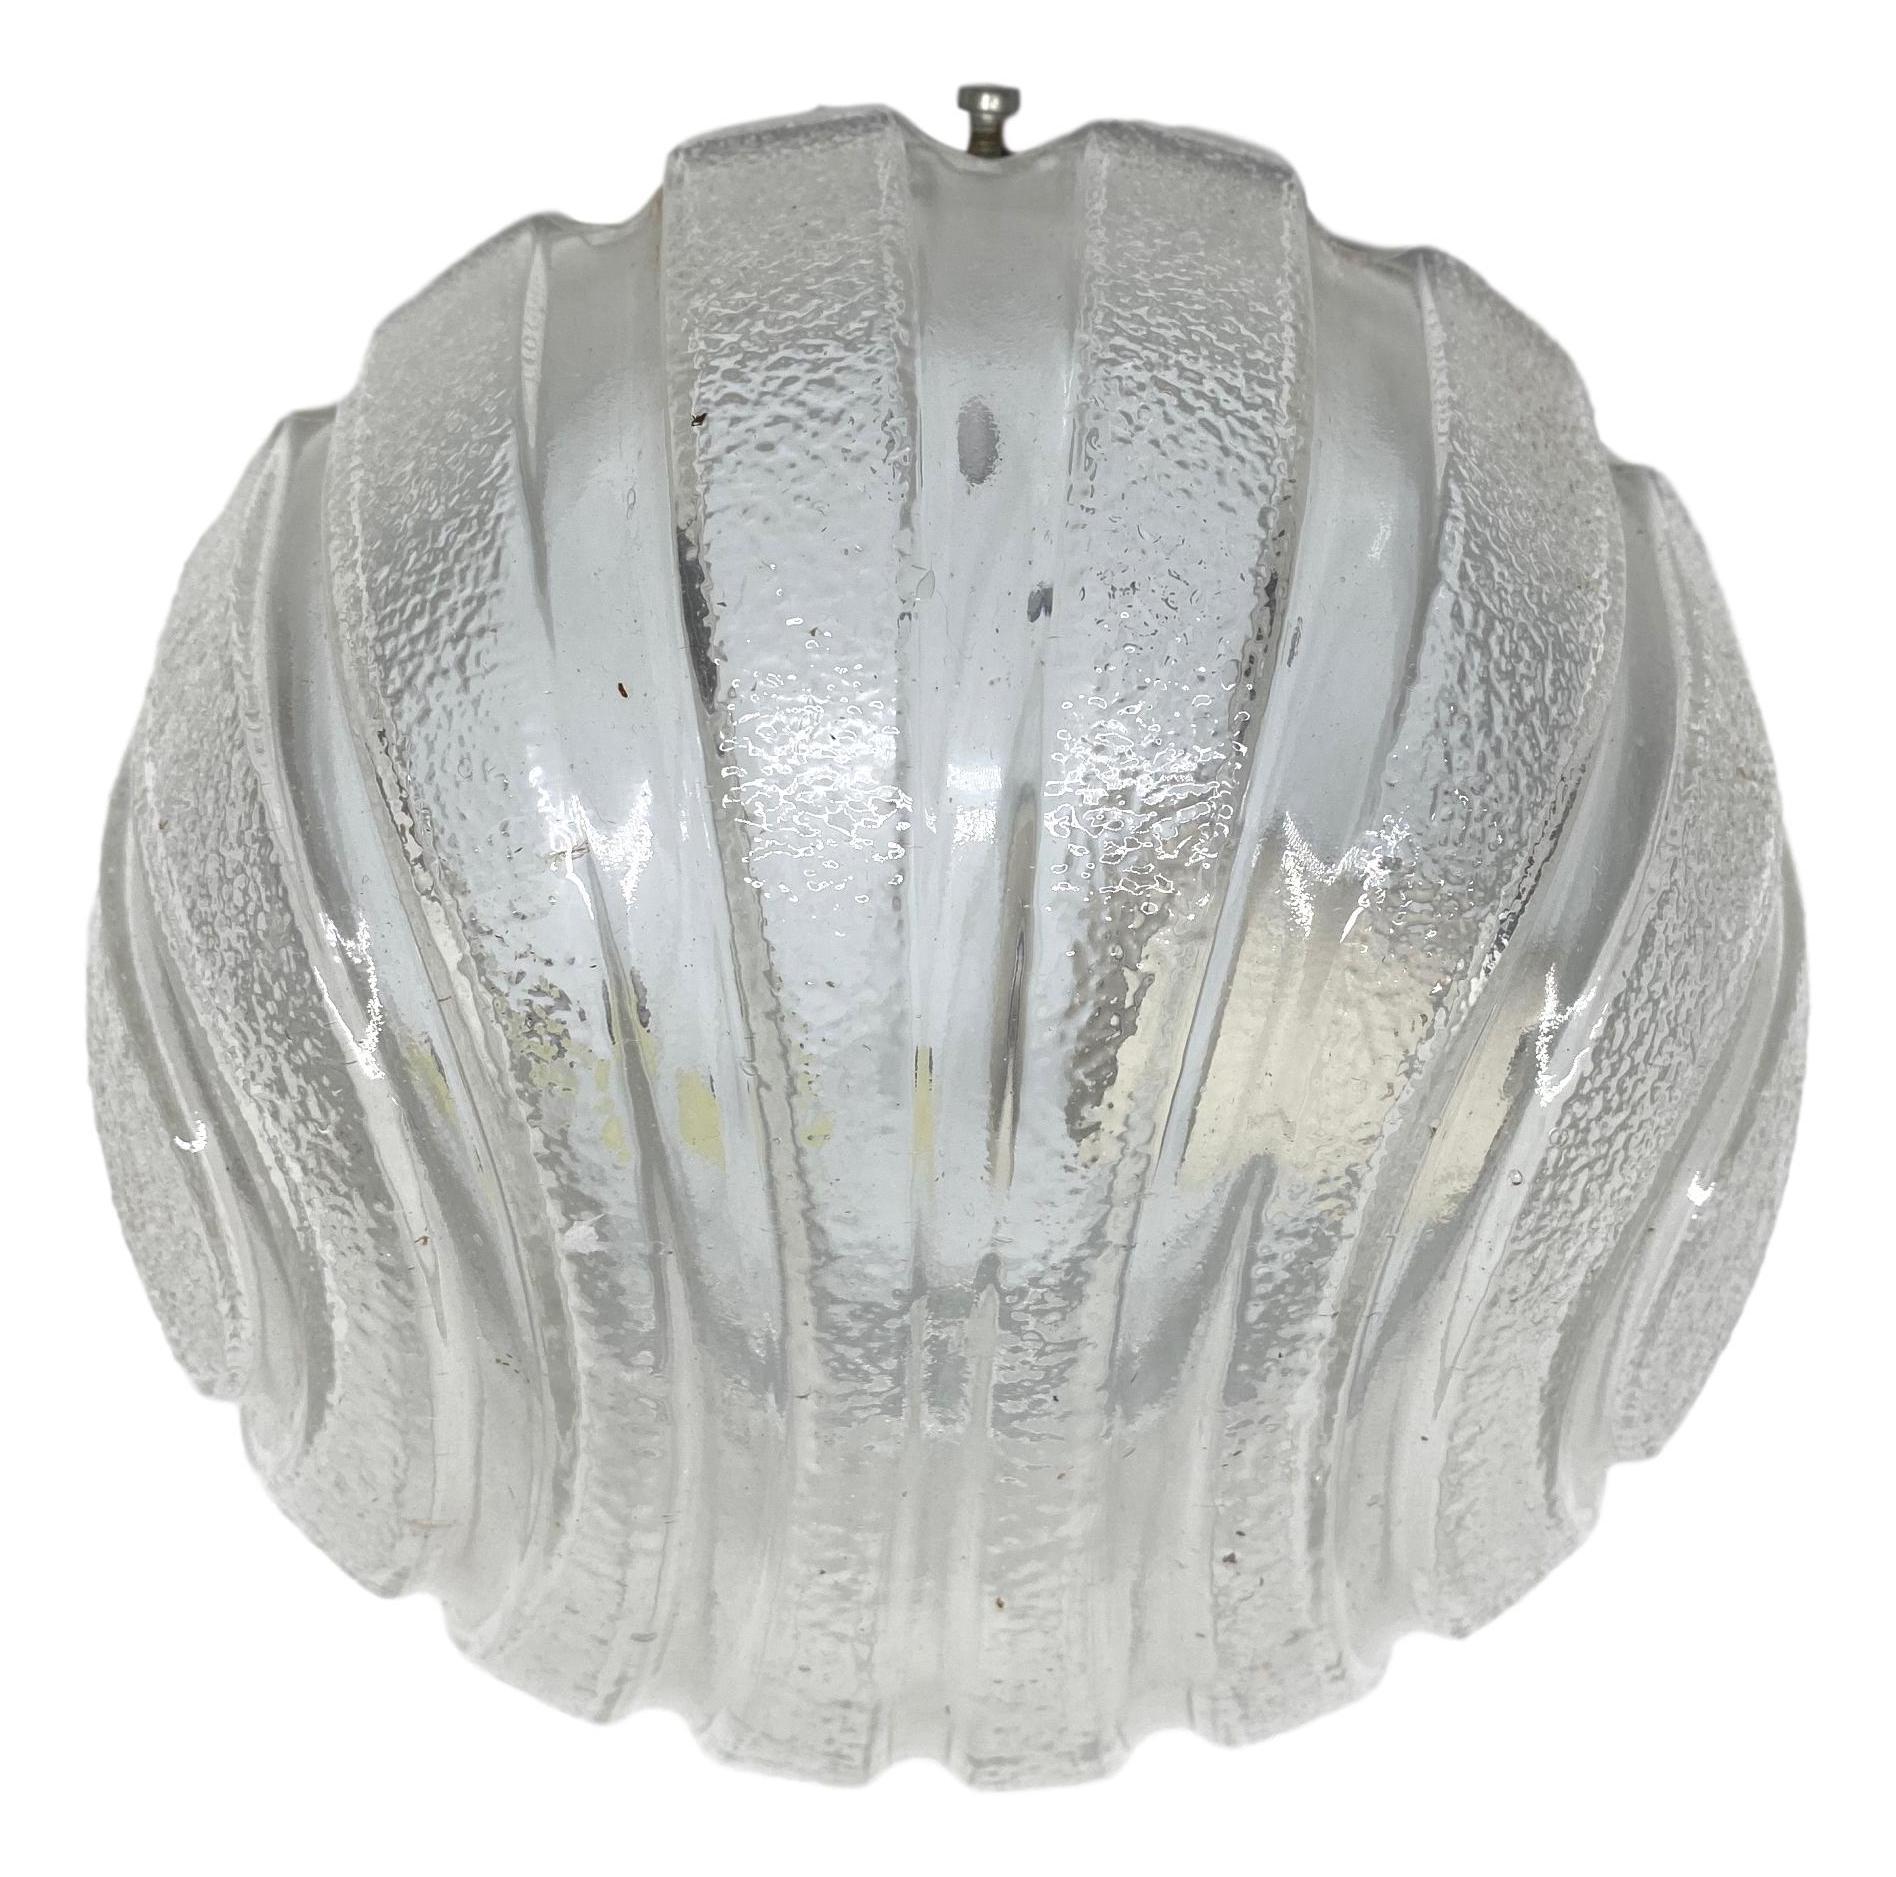 A petite gorgeous futuristic glass flush mount. It can be used also as a sconce. The light fixture requires one European E27 bulb, up to 60 watts. Clear ice glass, mounted on a white lacquered base.